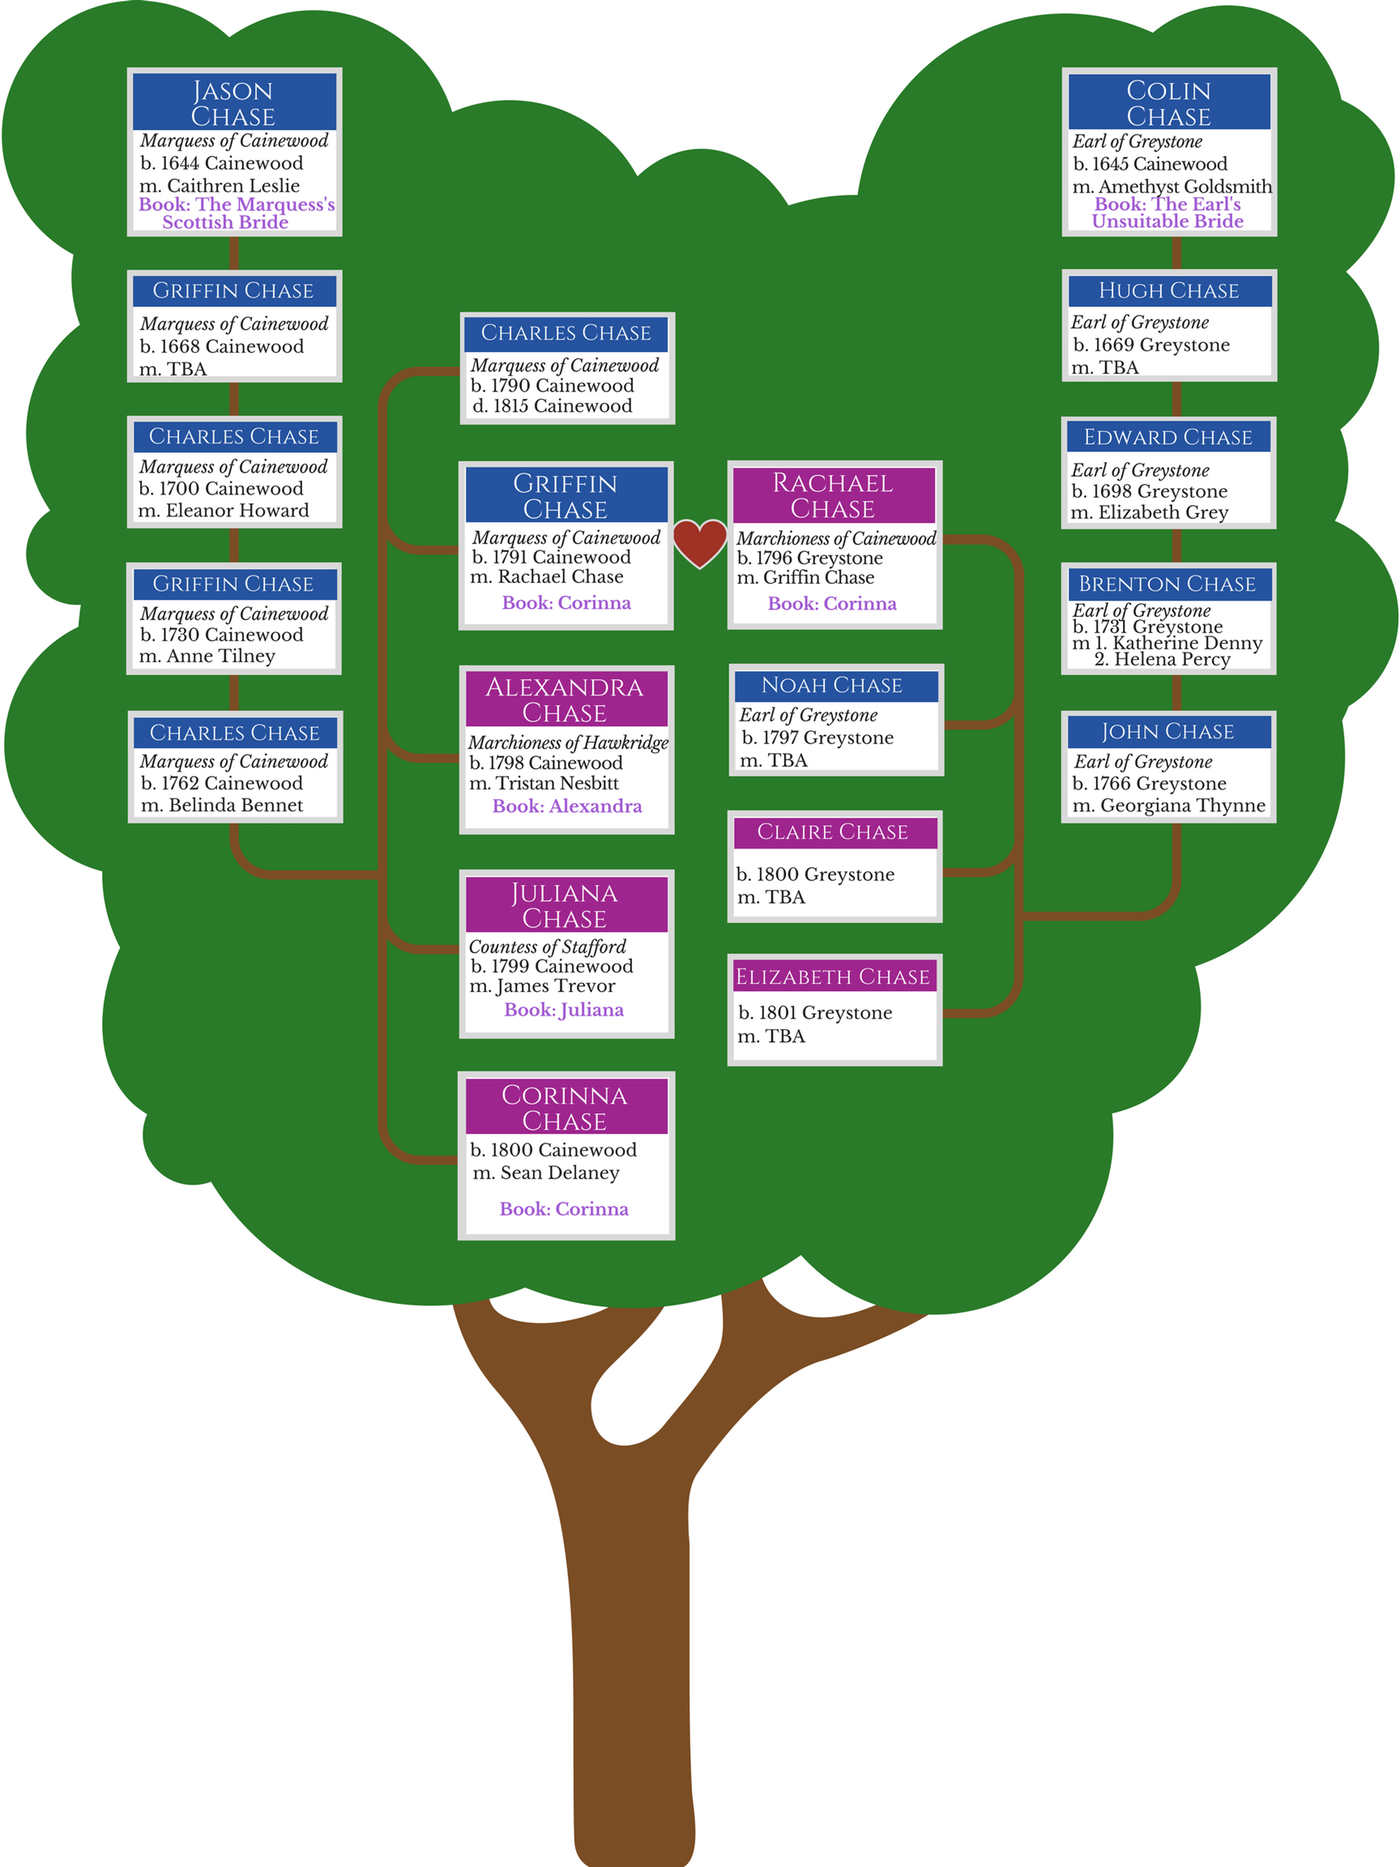 Family tree of the Regency Chases (descended from Jason and Colin Chase of the Restoration Chases)